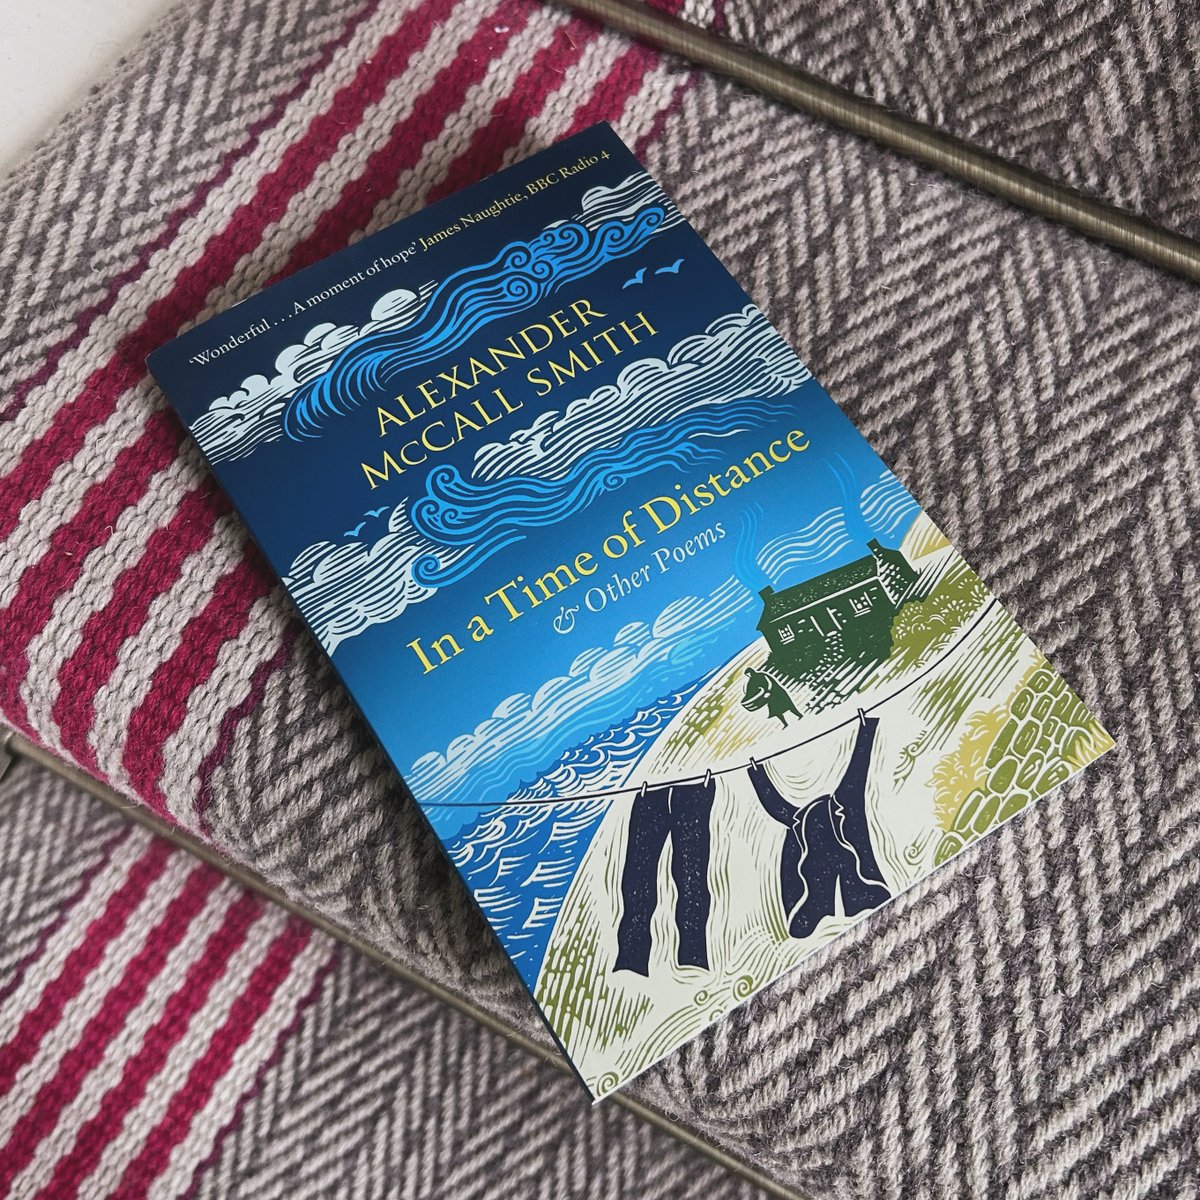 Today is #WorldPoetryDay! Alexander McCall Smith's debut poetry collection was published in 2020, reflecting on the challenges of that year. Now published in paperback, this charming and touching collection is as pertinent as ever, emphasising the importance of connection.